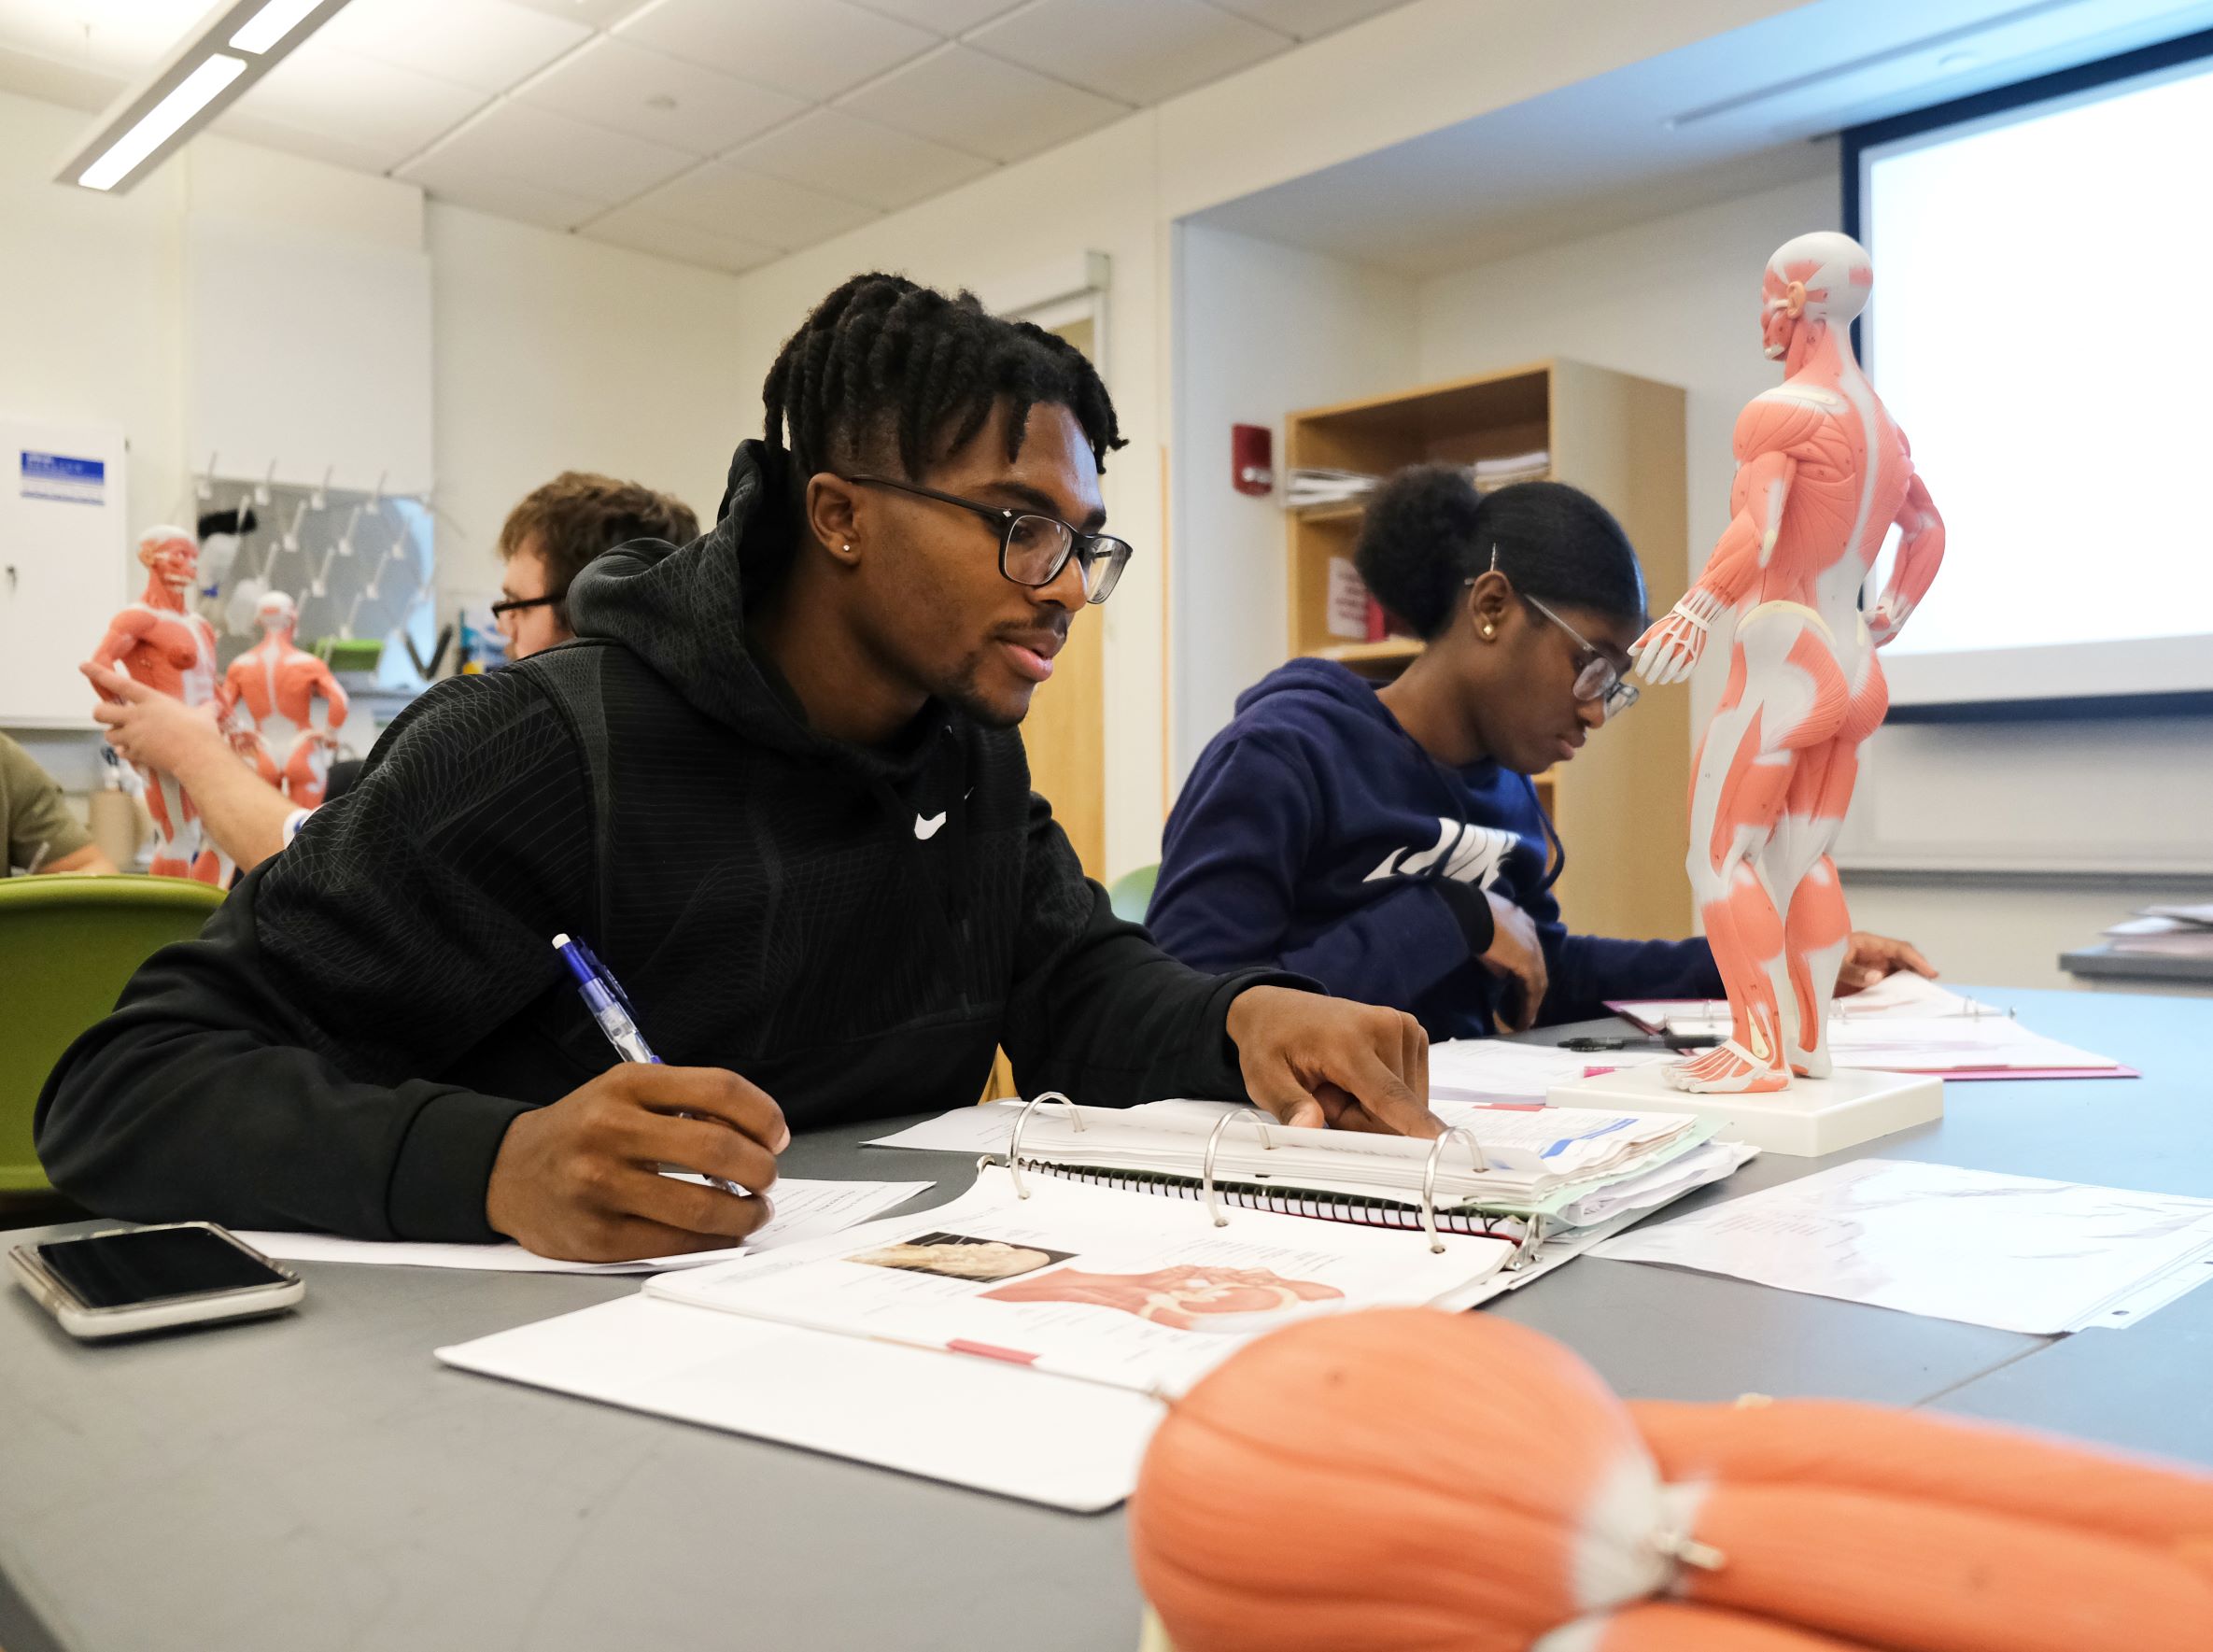 Around Campus - Anatomy and Physiology Lab